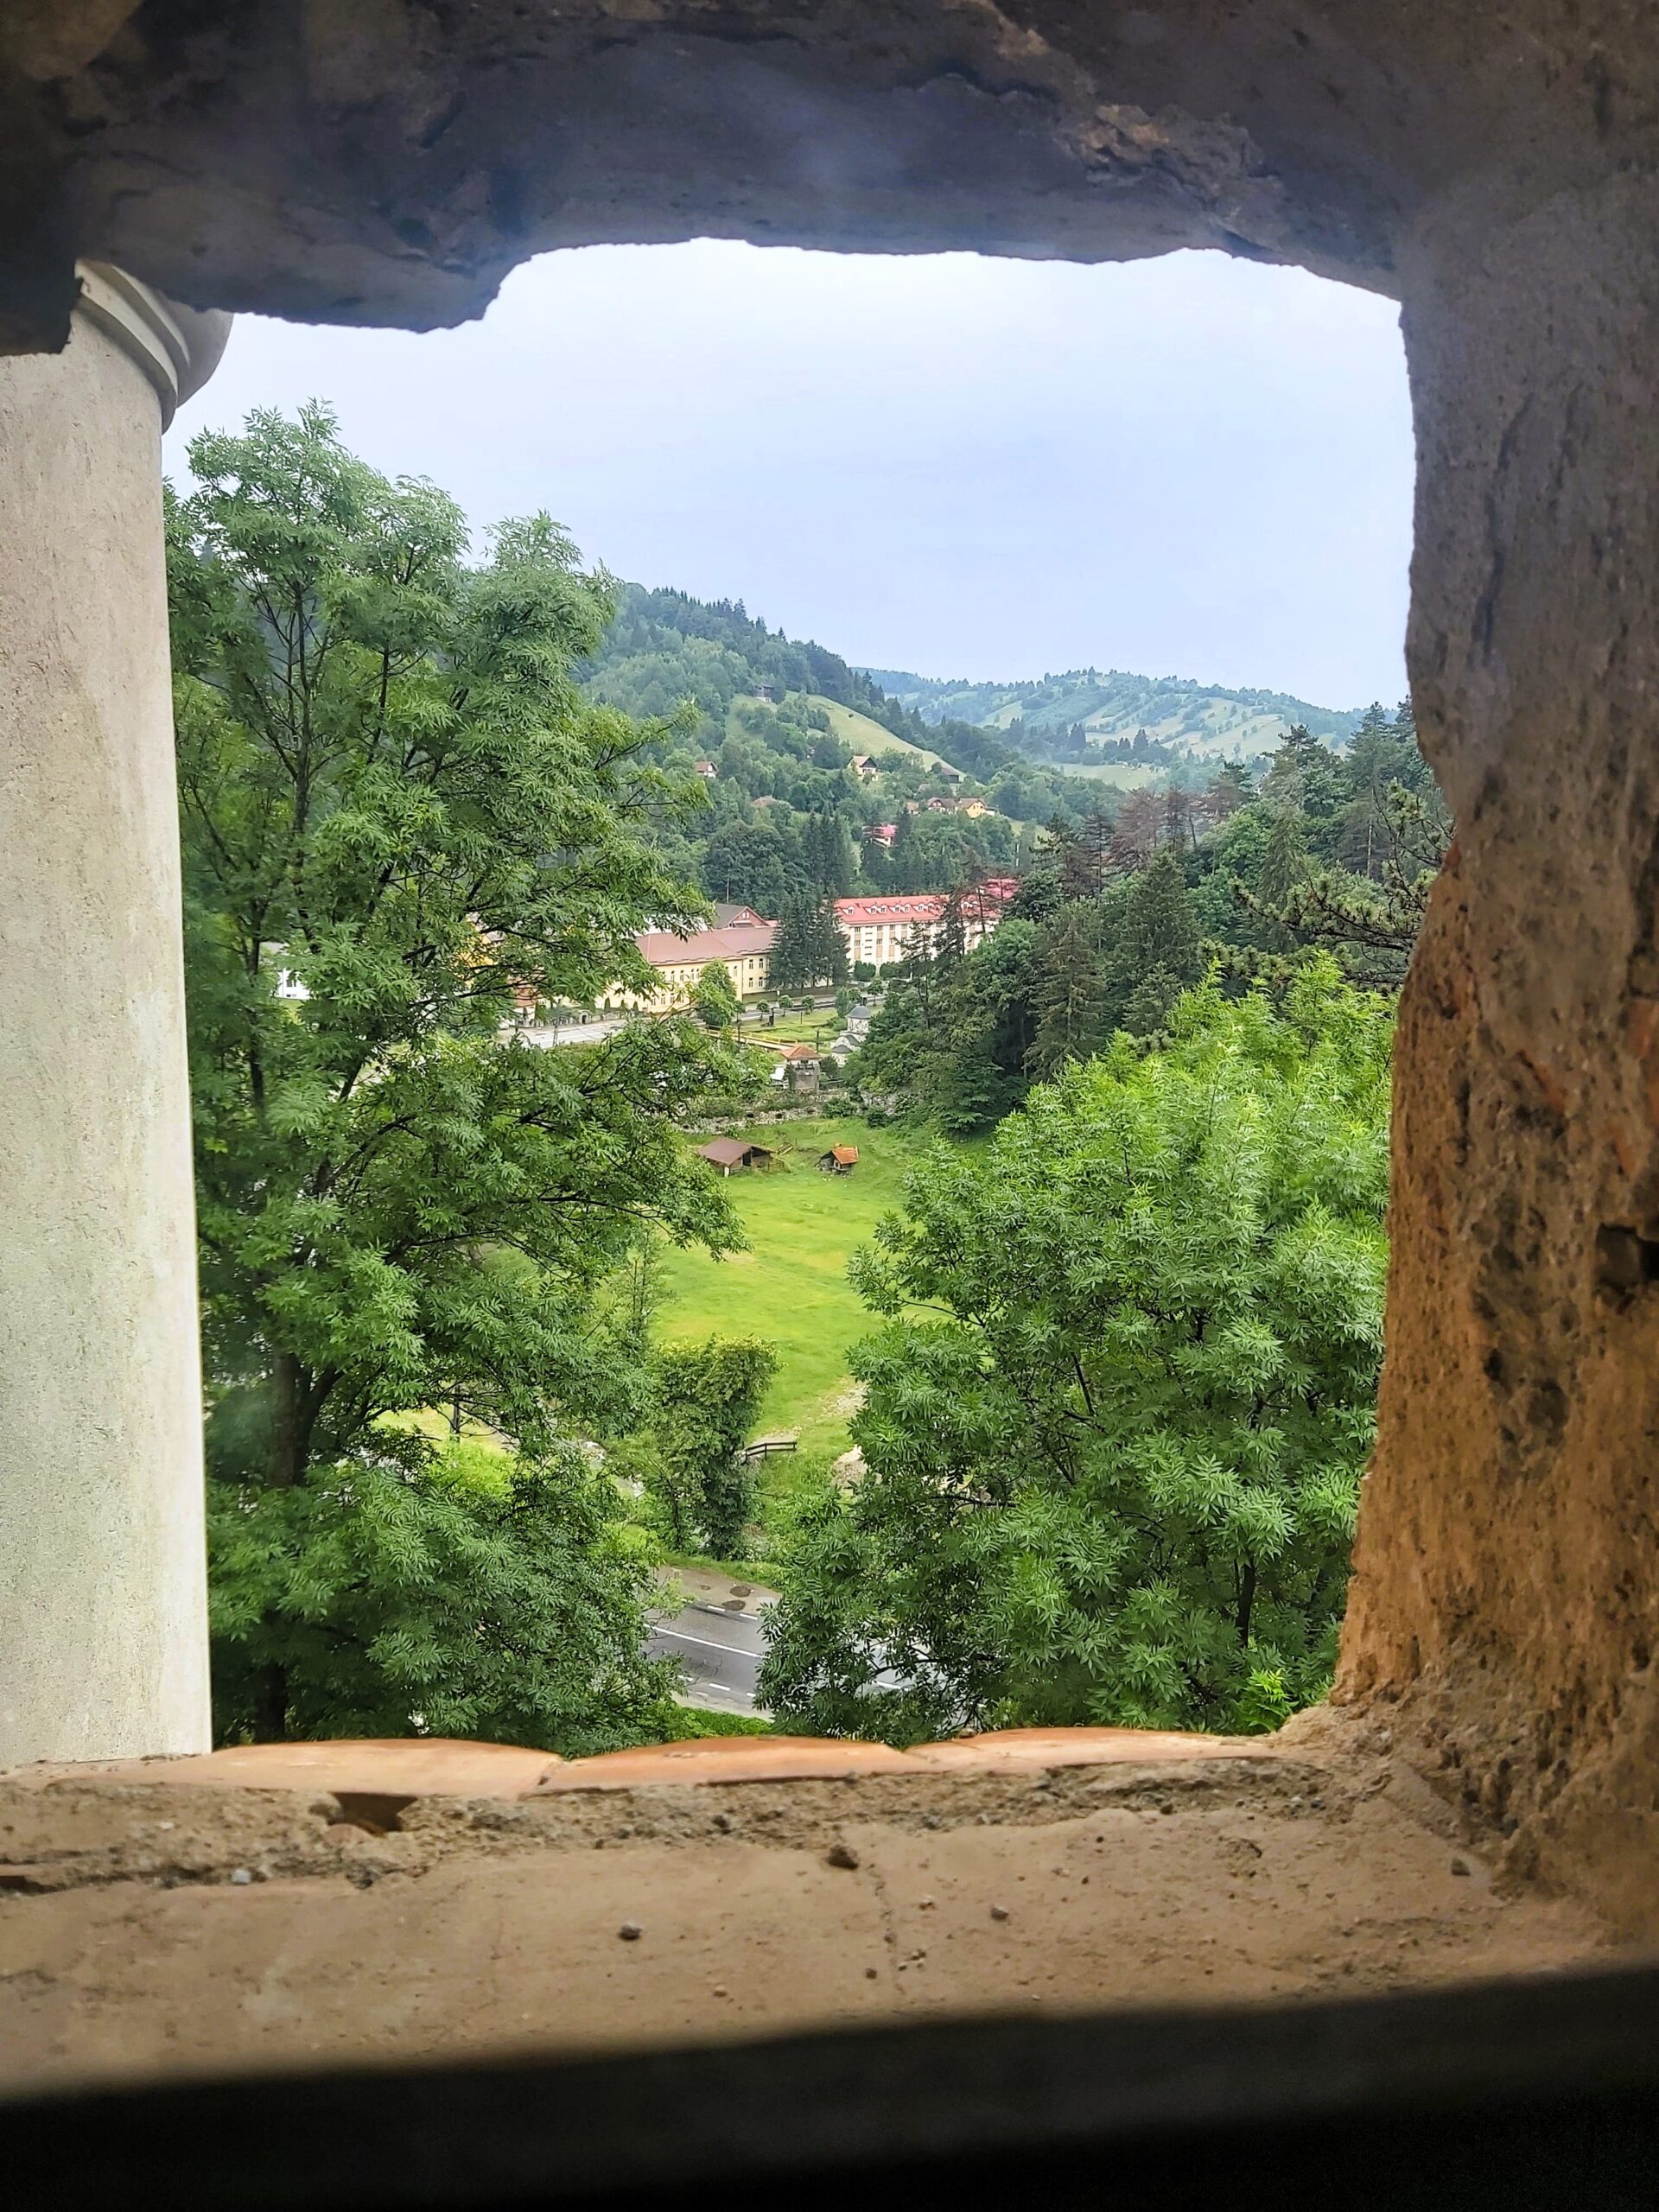 View of Bran from window at Bran Castle, Romania